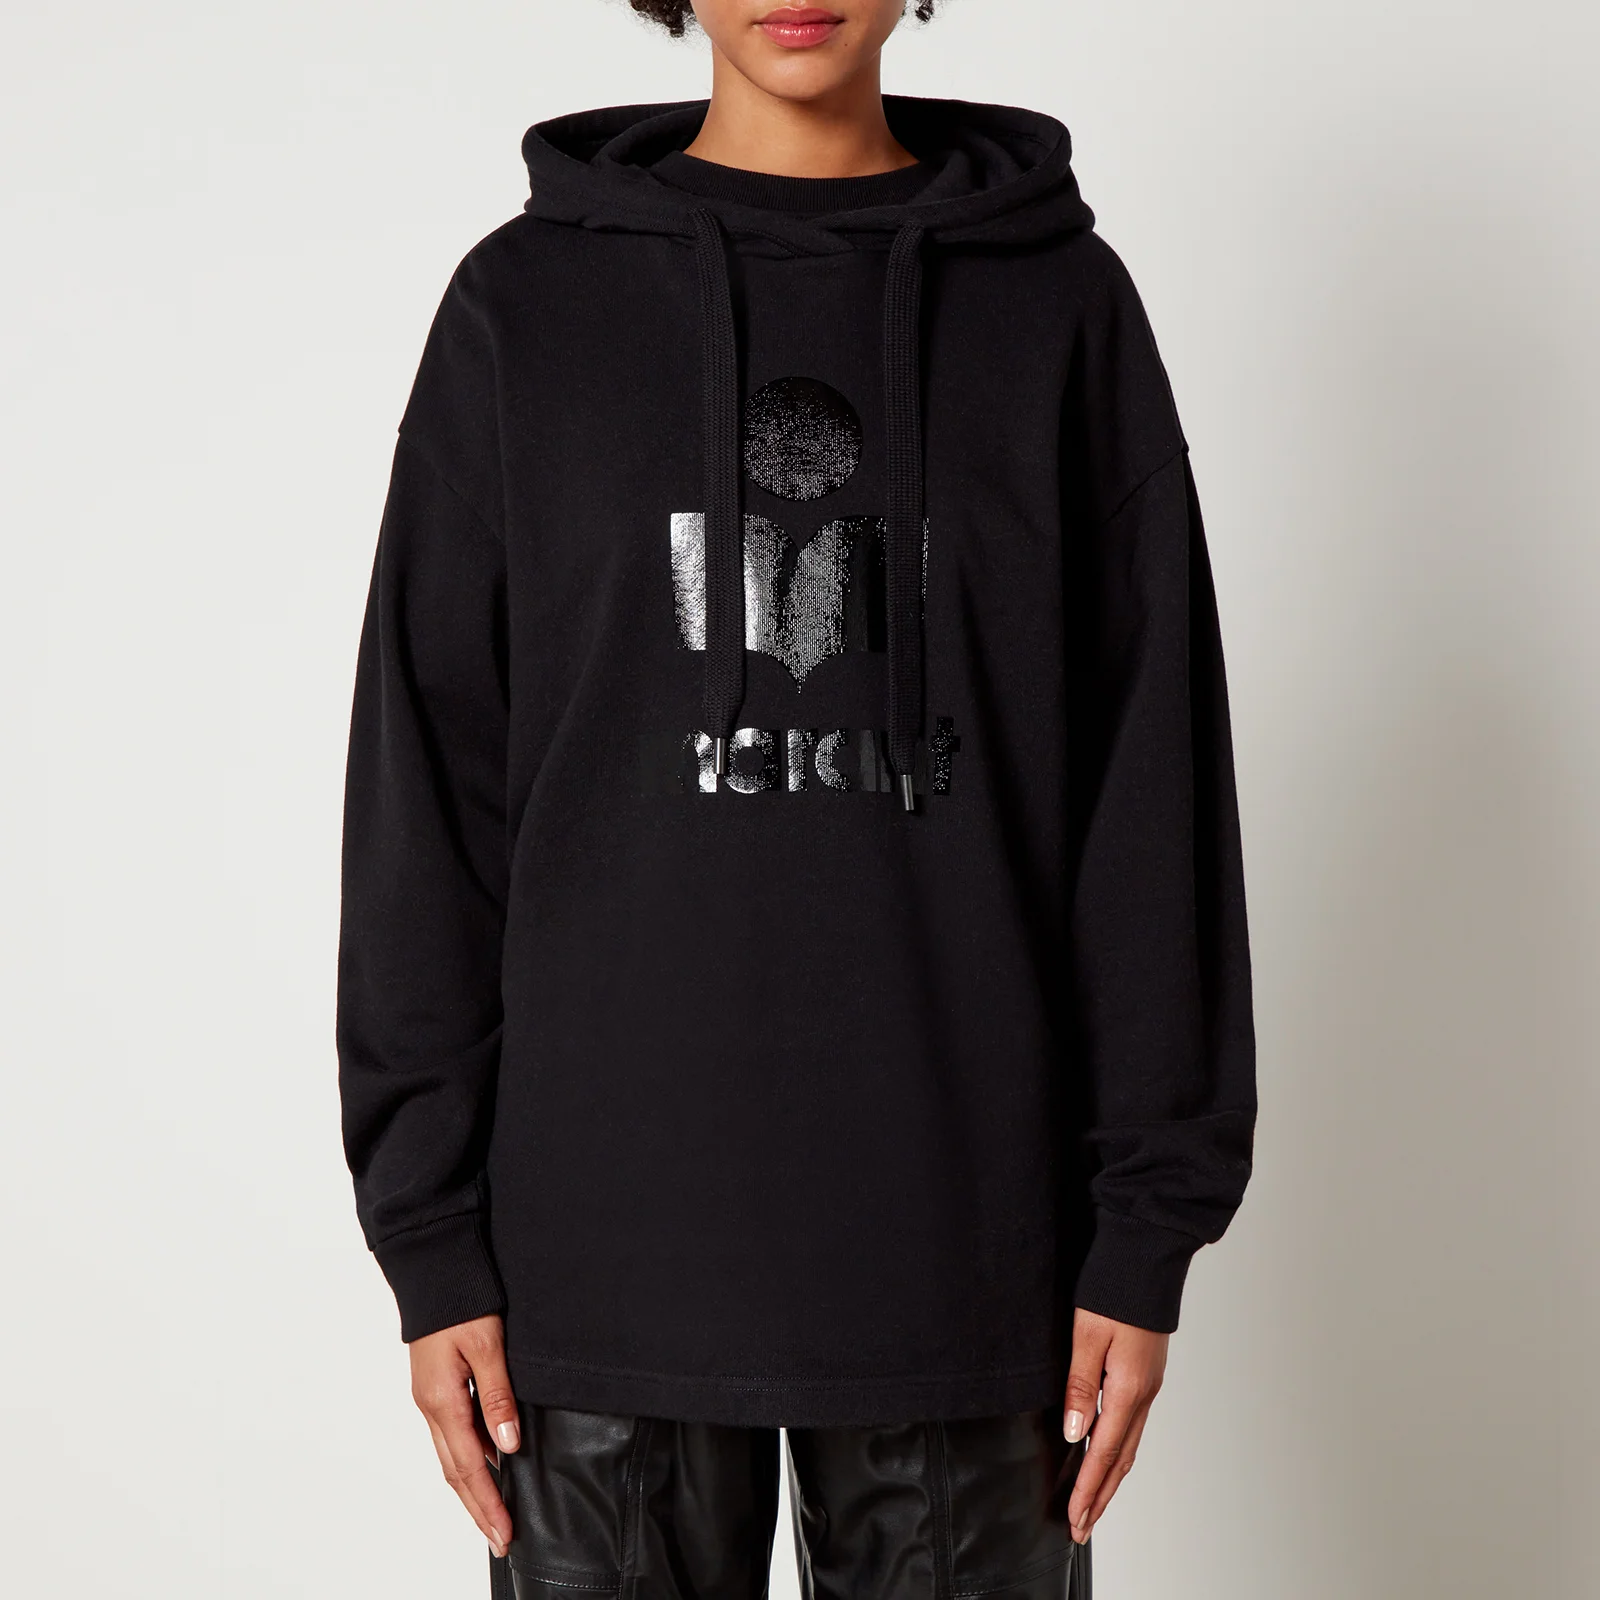 Marant Etoile Marly Cotton-Blend Jersey Hoodie Image 1